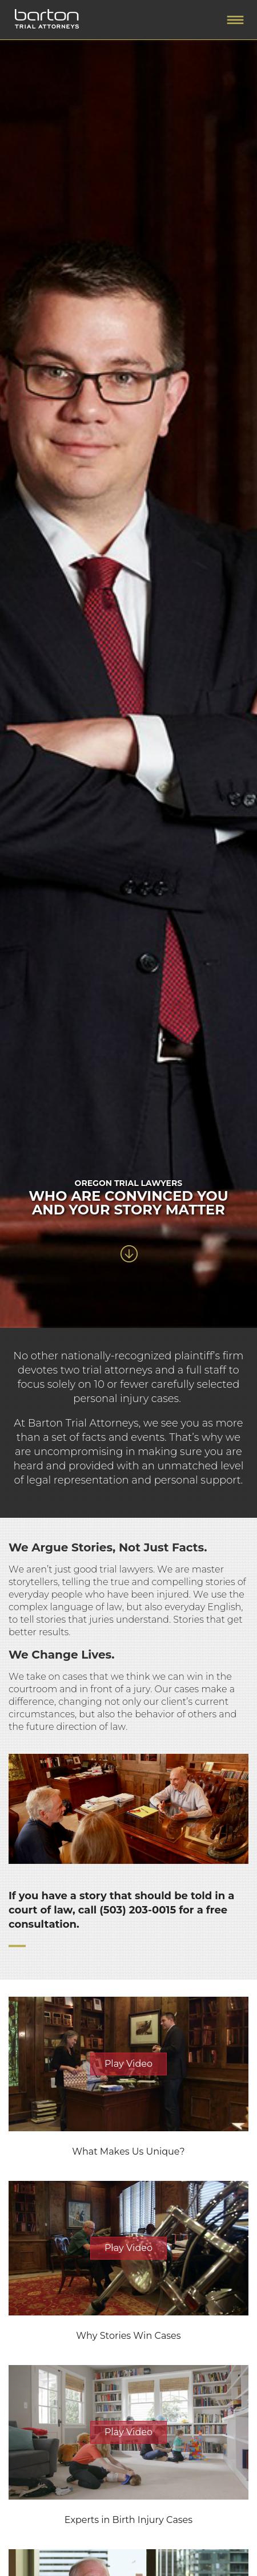 Barton & Strever PC - Newport OR Lawyers